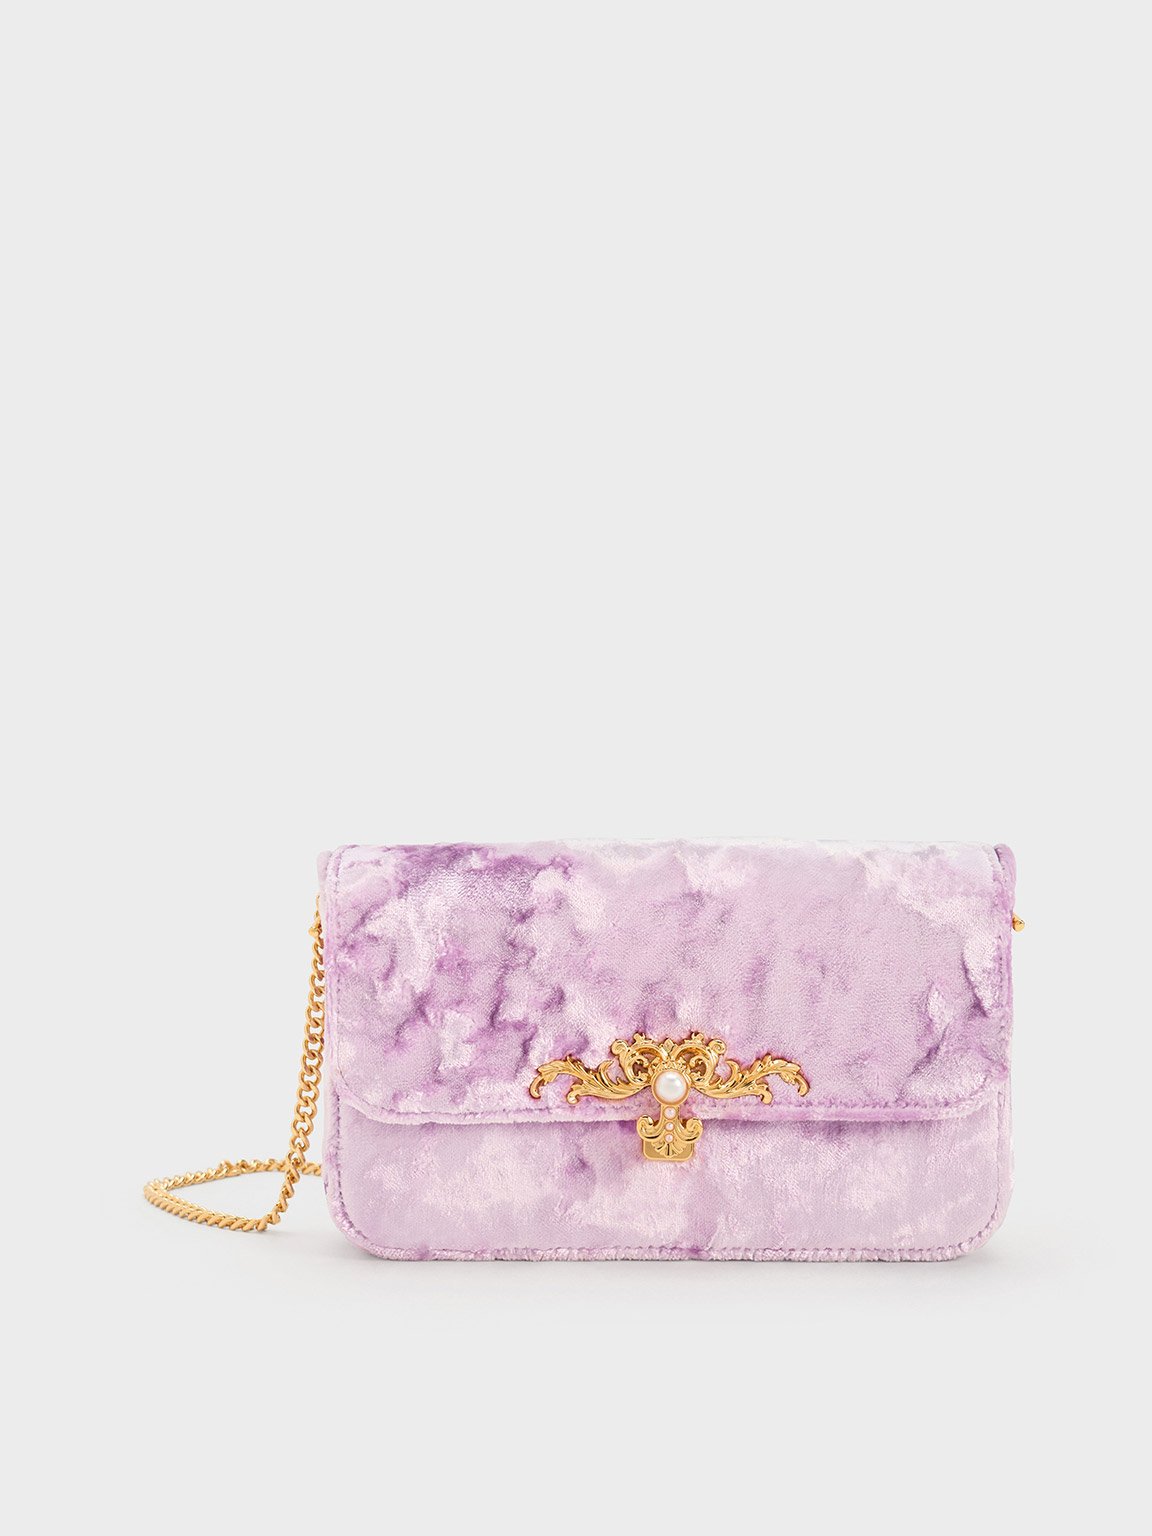 Charles & Keith Merial Metallic Accent Velvet Clutch In Lilac